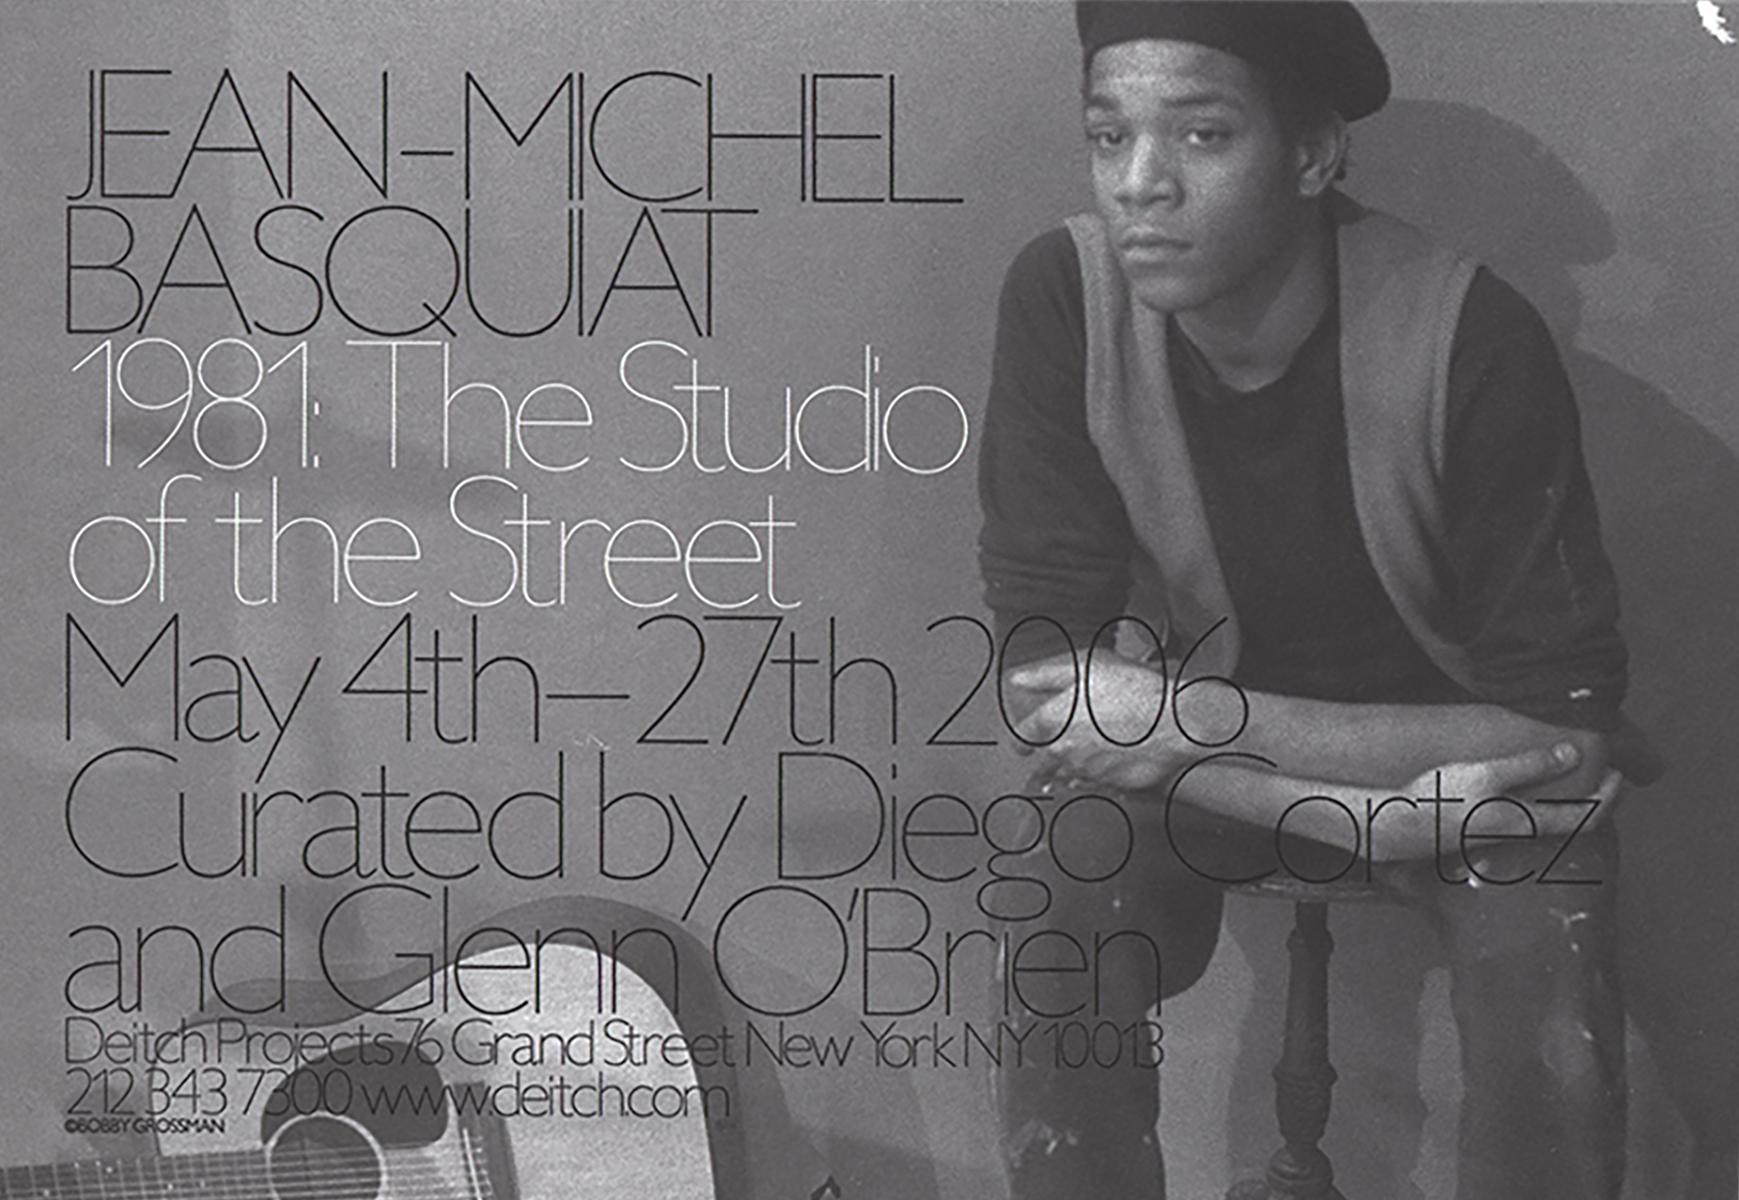 Basquiat Downtown 81 collection (Basquiat, 1981: The Studio of the Street)  For Sale 1